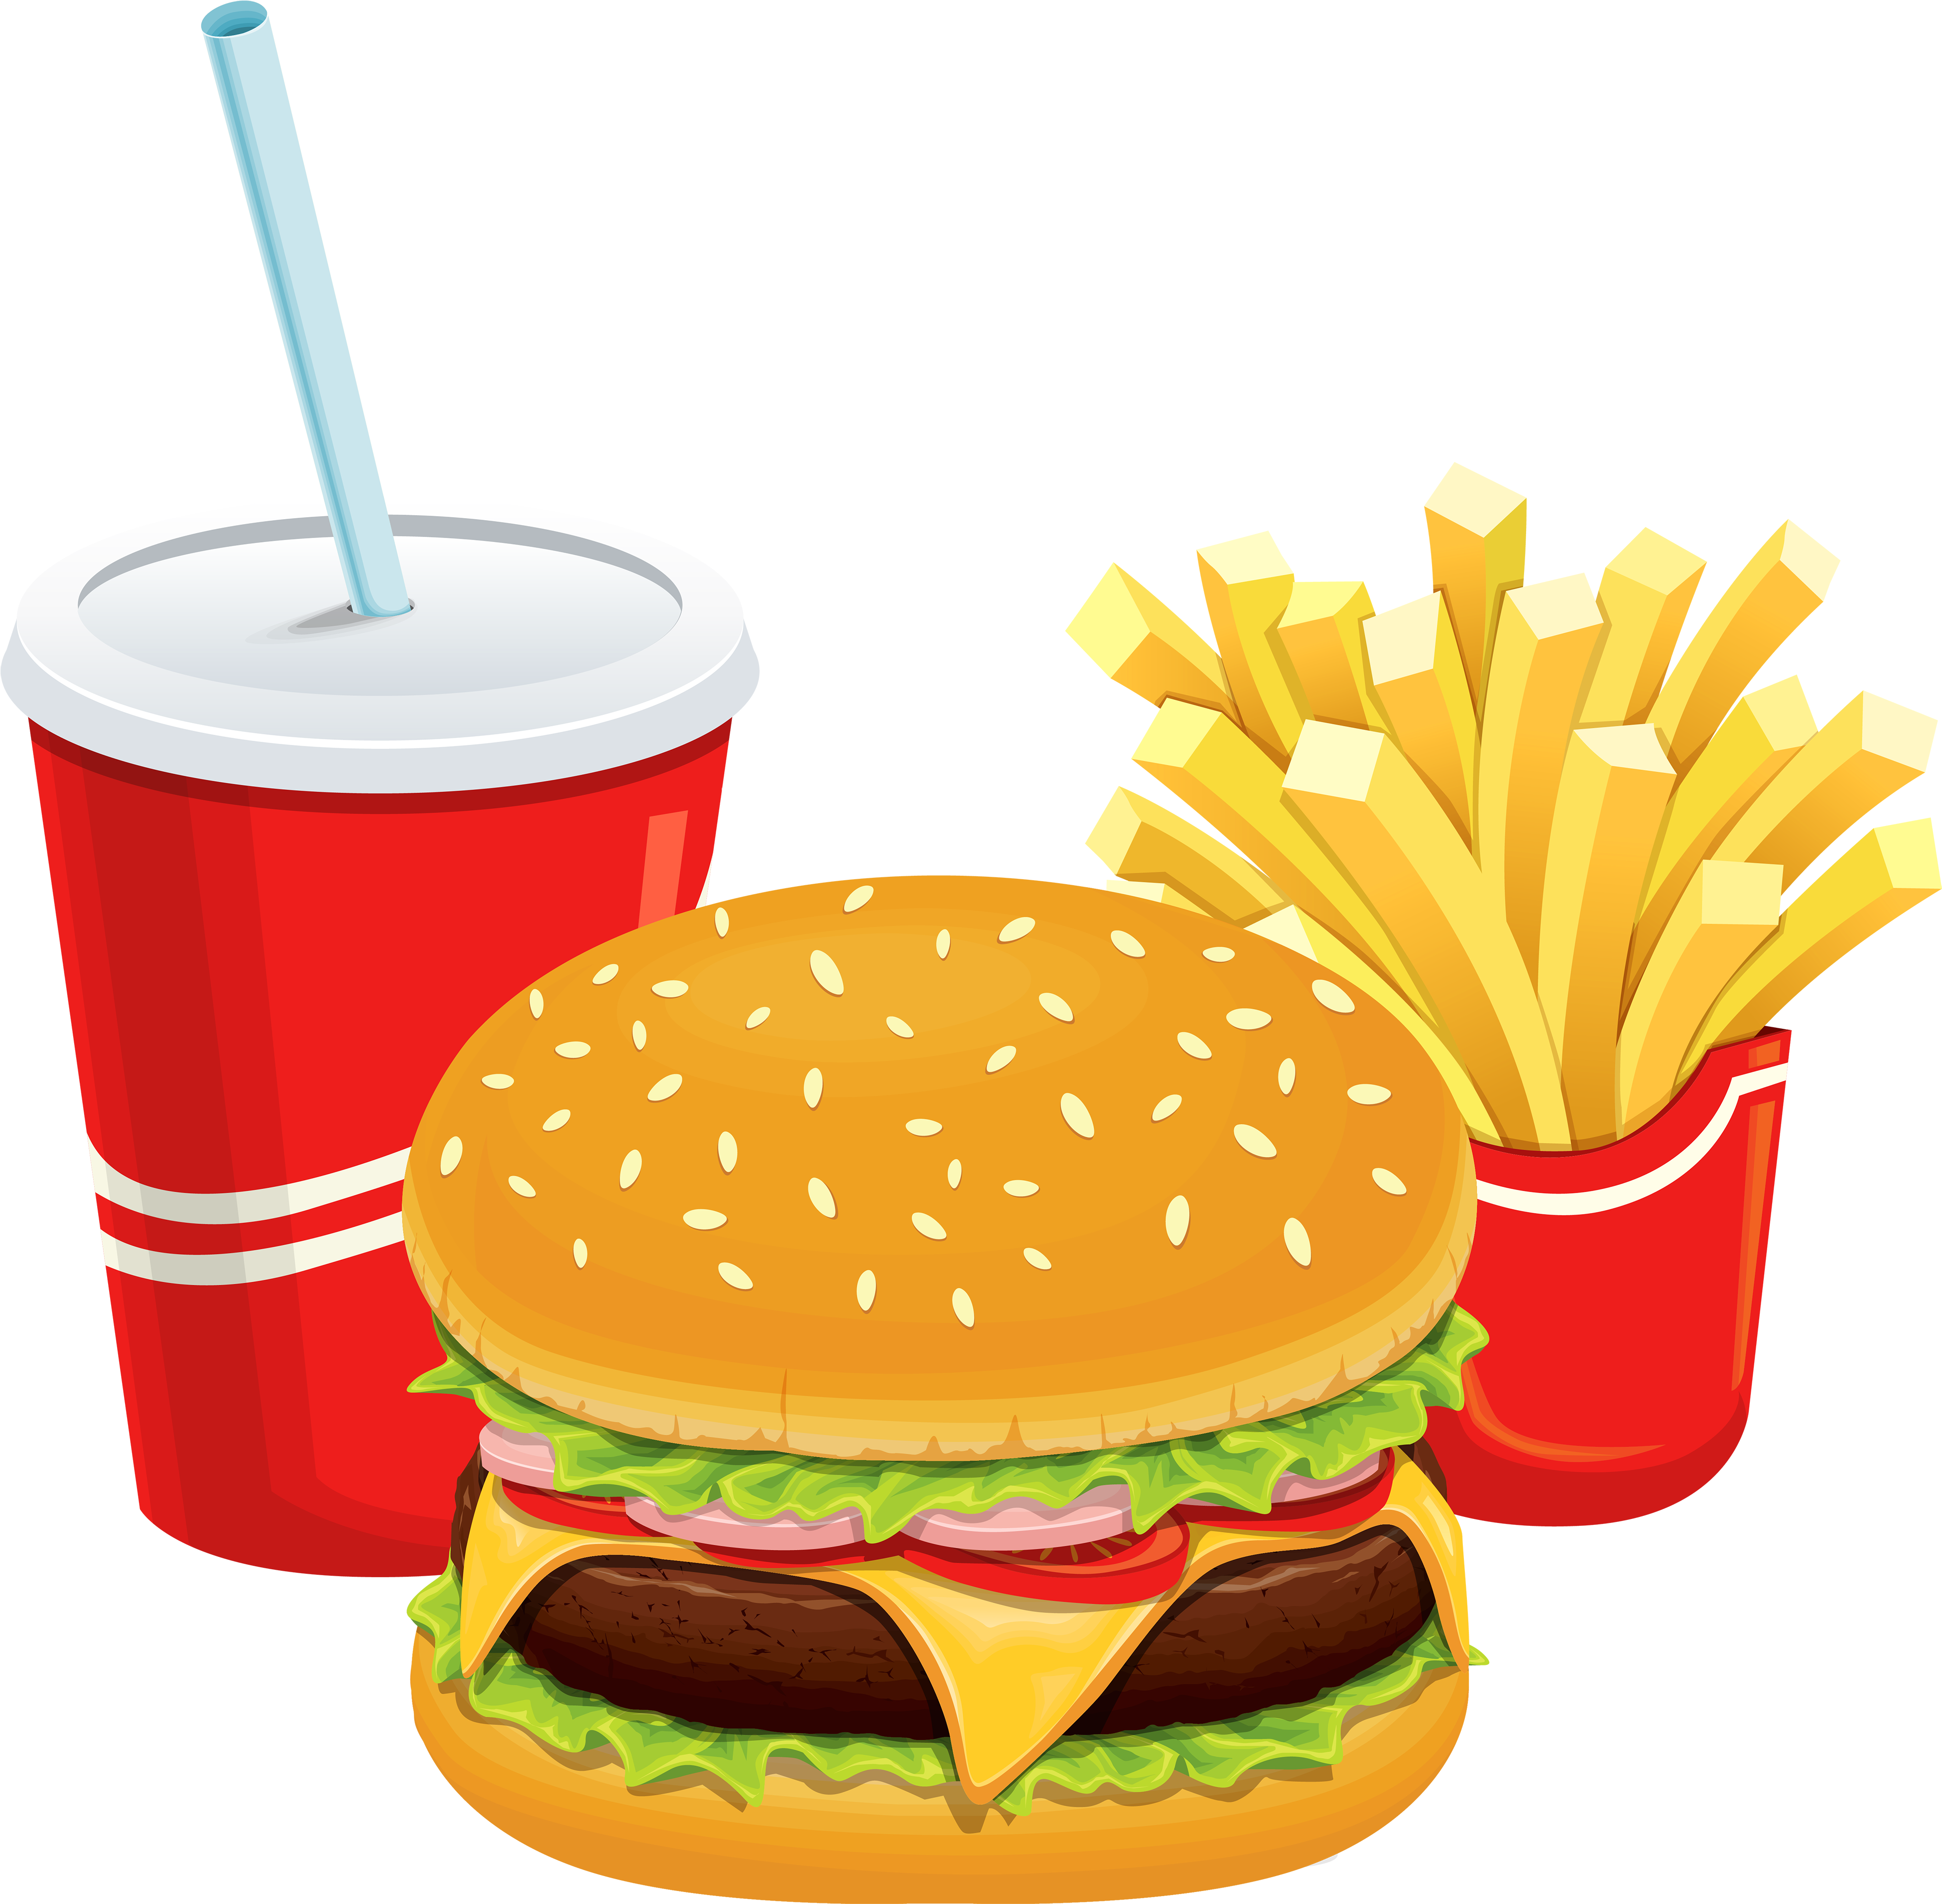 Food Burger Fries PNG Clipart Background